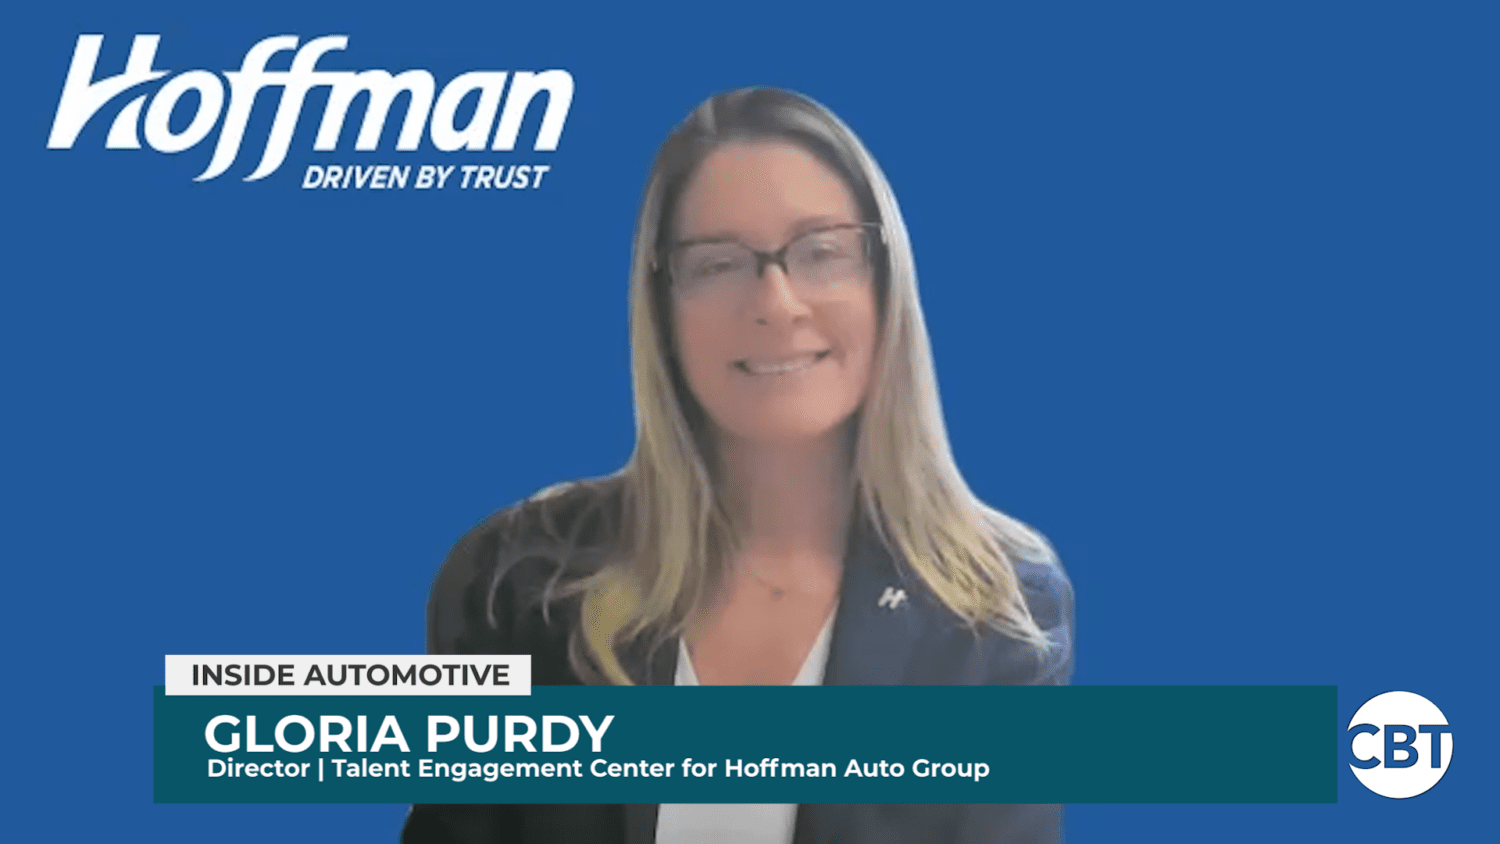 Gloria Purdy joins Inside Automotive to discuss why dealers must incorporate employee feedback to identify and retain high quality talent.